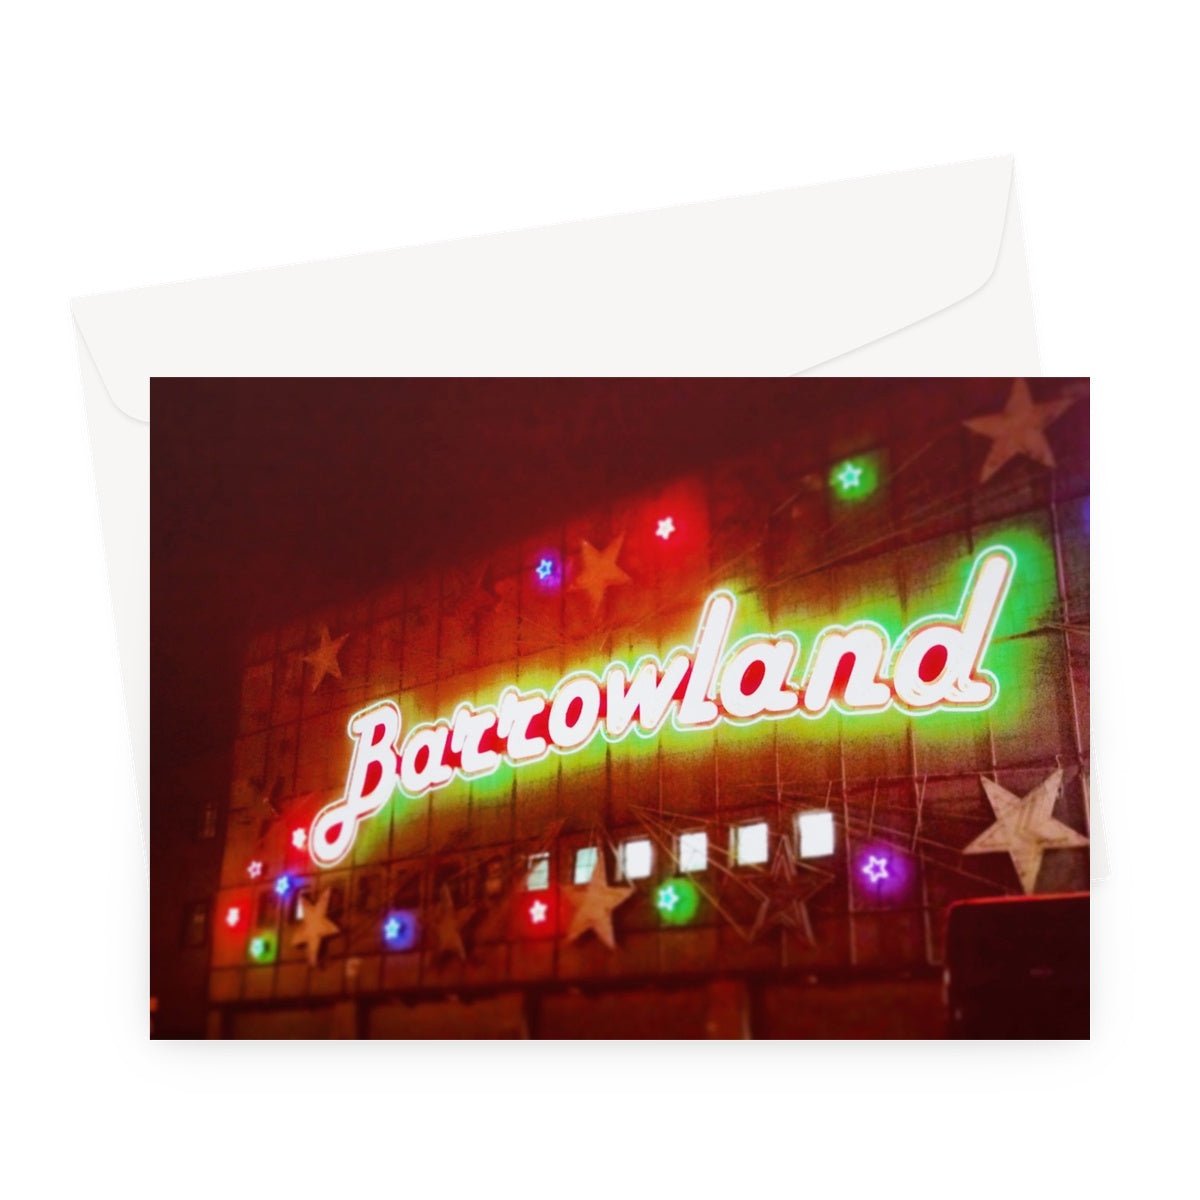 A Neon Glasgow Barrowlands Art Gifts Greeting Card-Greetings Cards-Edinburgh & Glasgow Art Gallery-A5 Landscape-10 Cards-Paintings, Prints, Homeware, Art Gifts From Scotland By Scottish Artist Kevin Hunter